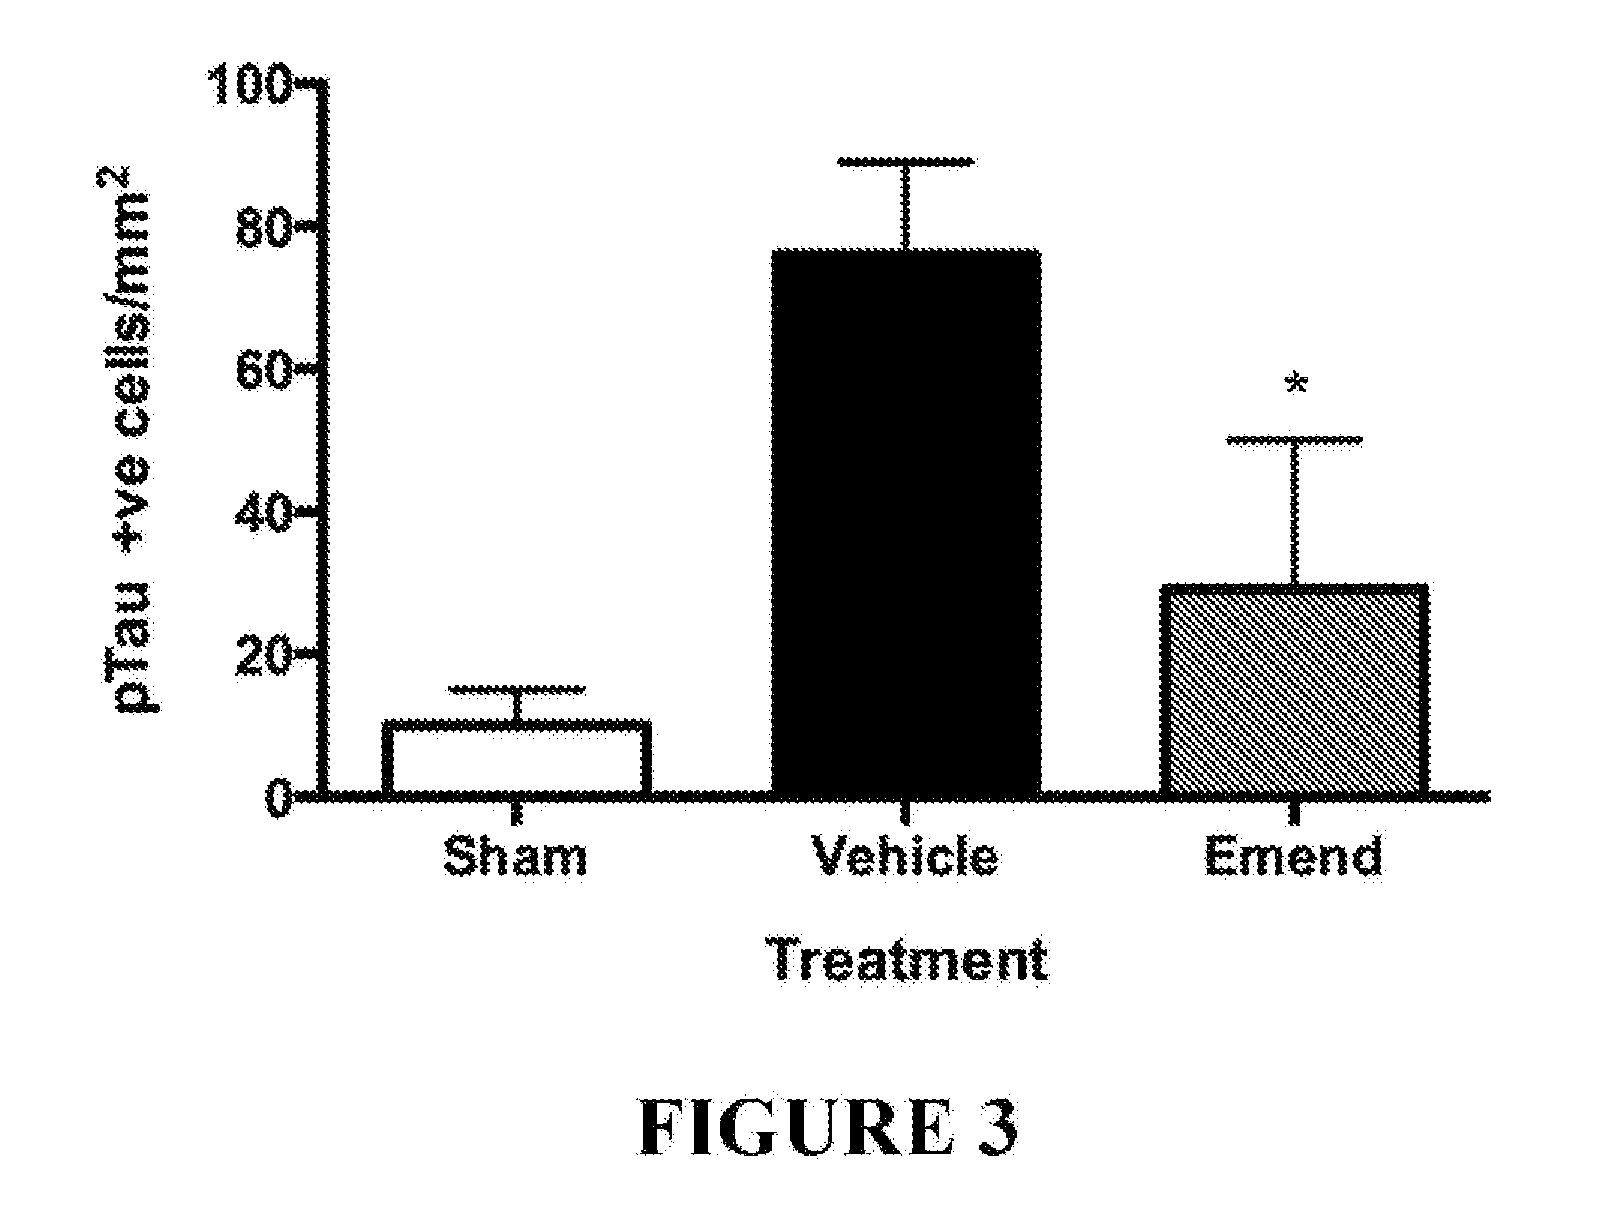 Method for Preventing and/or Treating Chronic Traumatic Encephalopathy - III